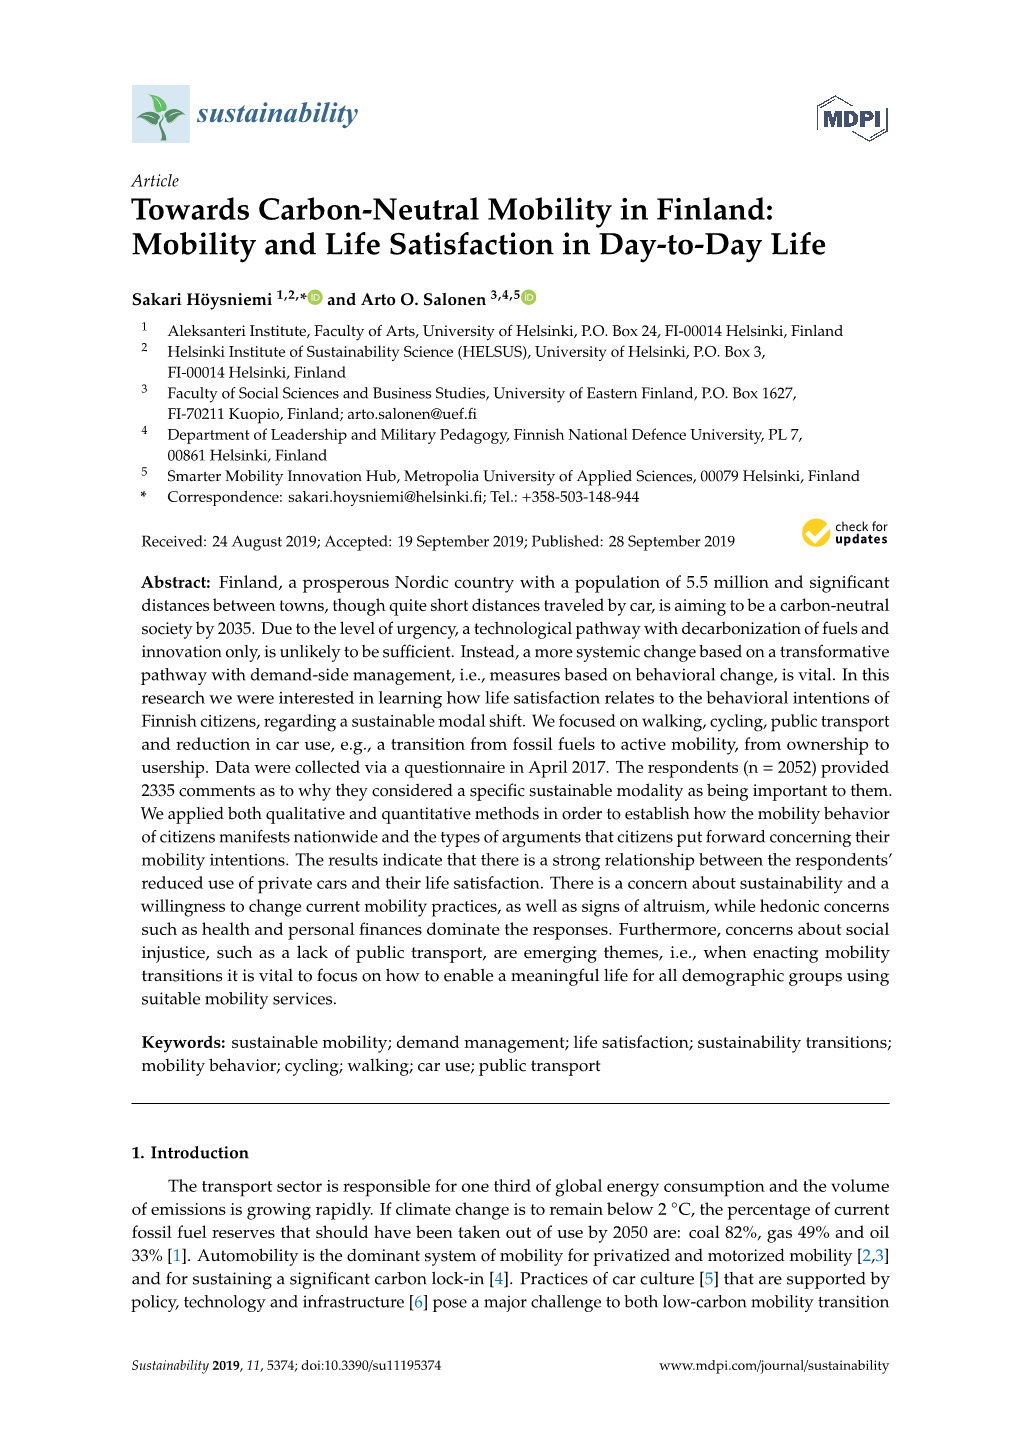 Towards Carbon-Neutral Mobility in Finland: Mobility and Life Satisfaction in Day-To-Day Life